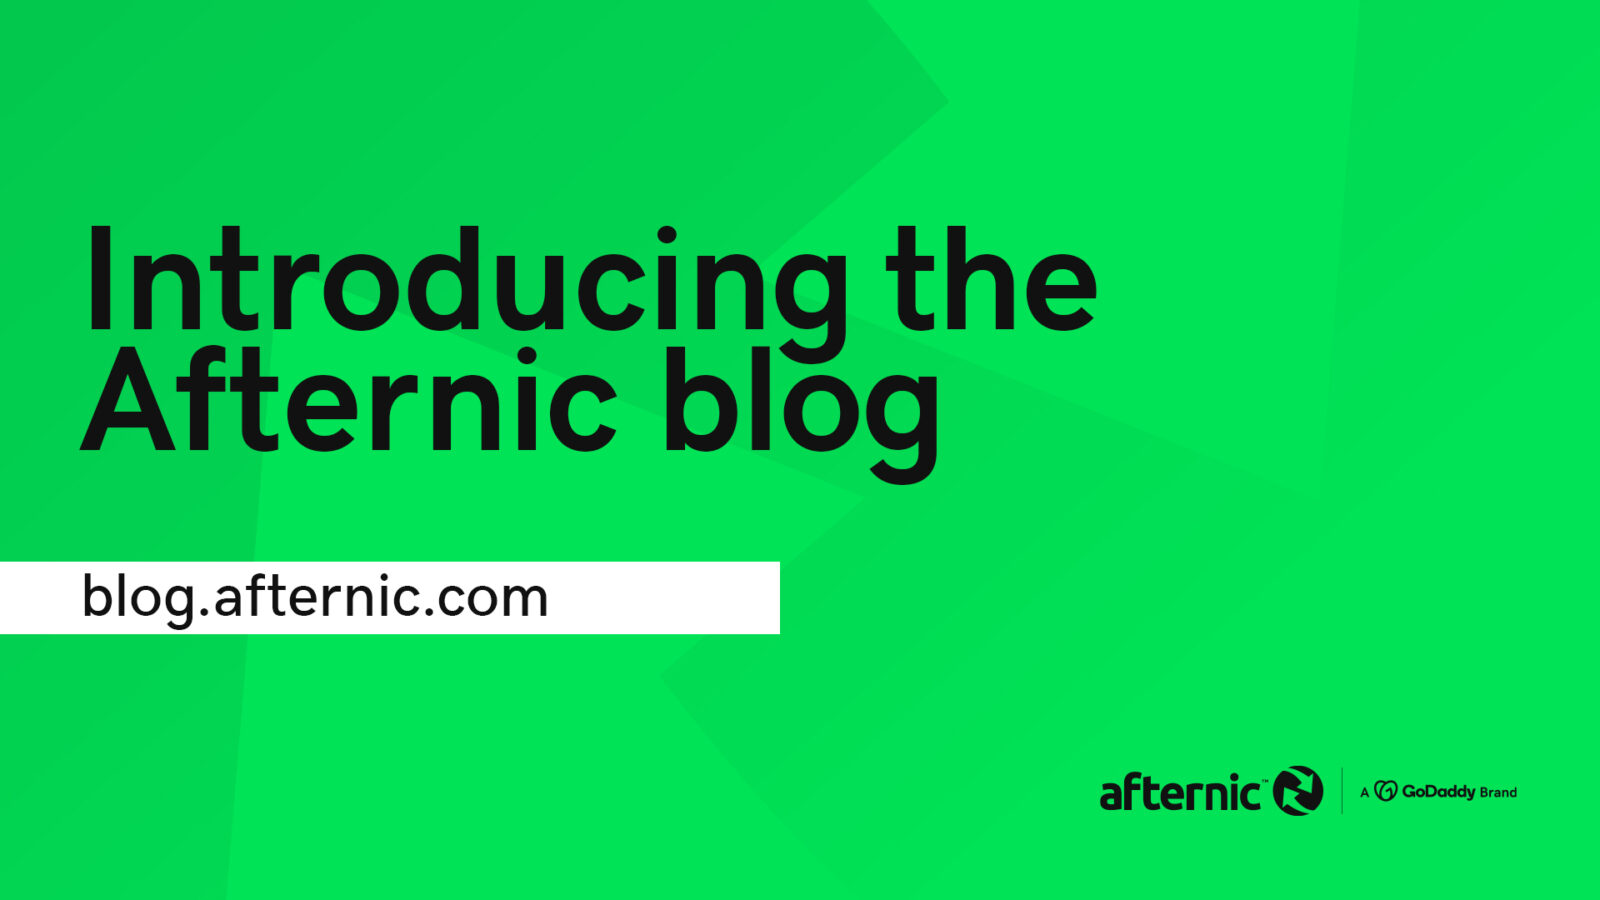 A header image introducing the Afternic blog